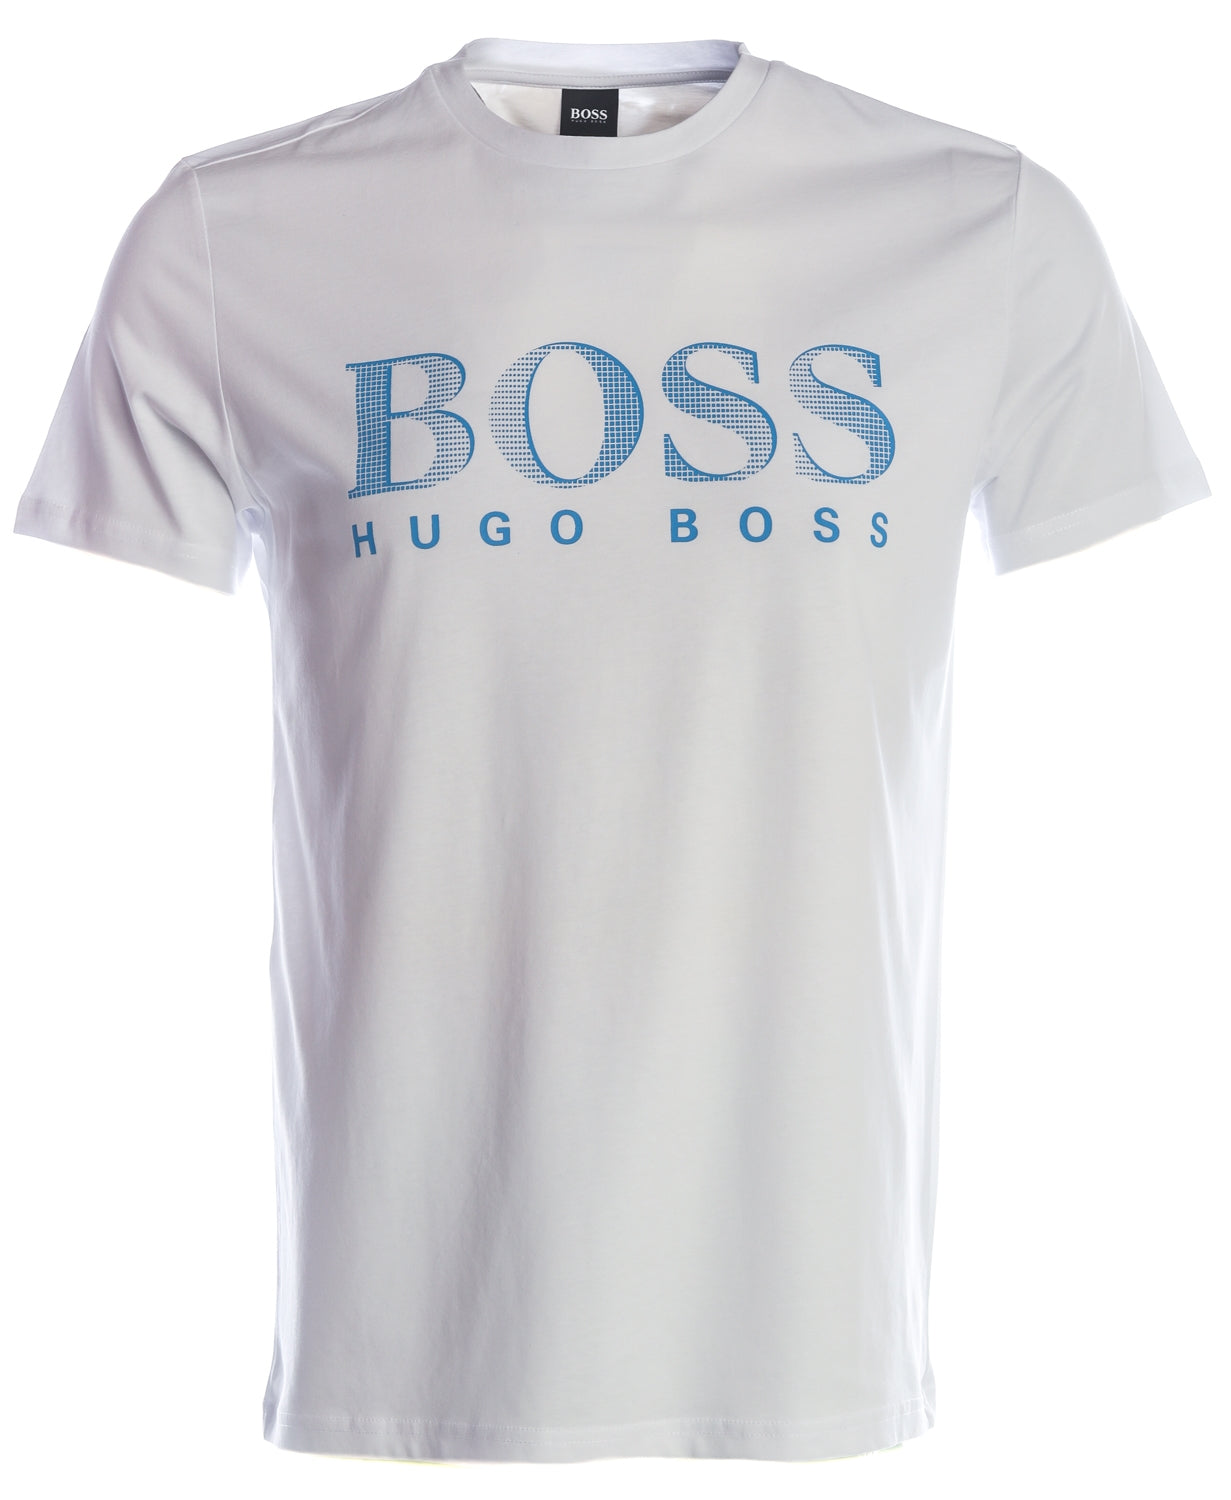 BOSS RN UV Protection T-Shirt in White & Turquoise